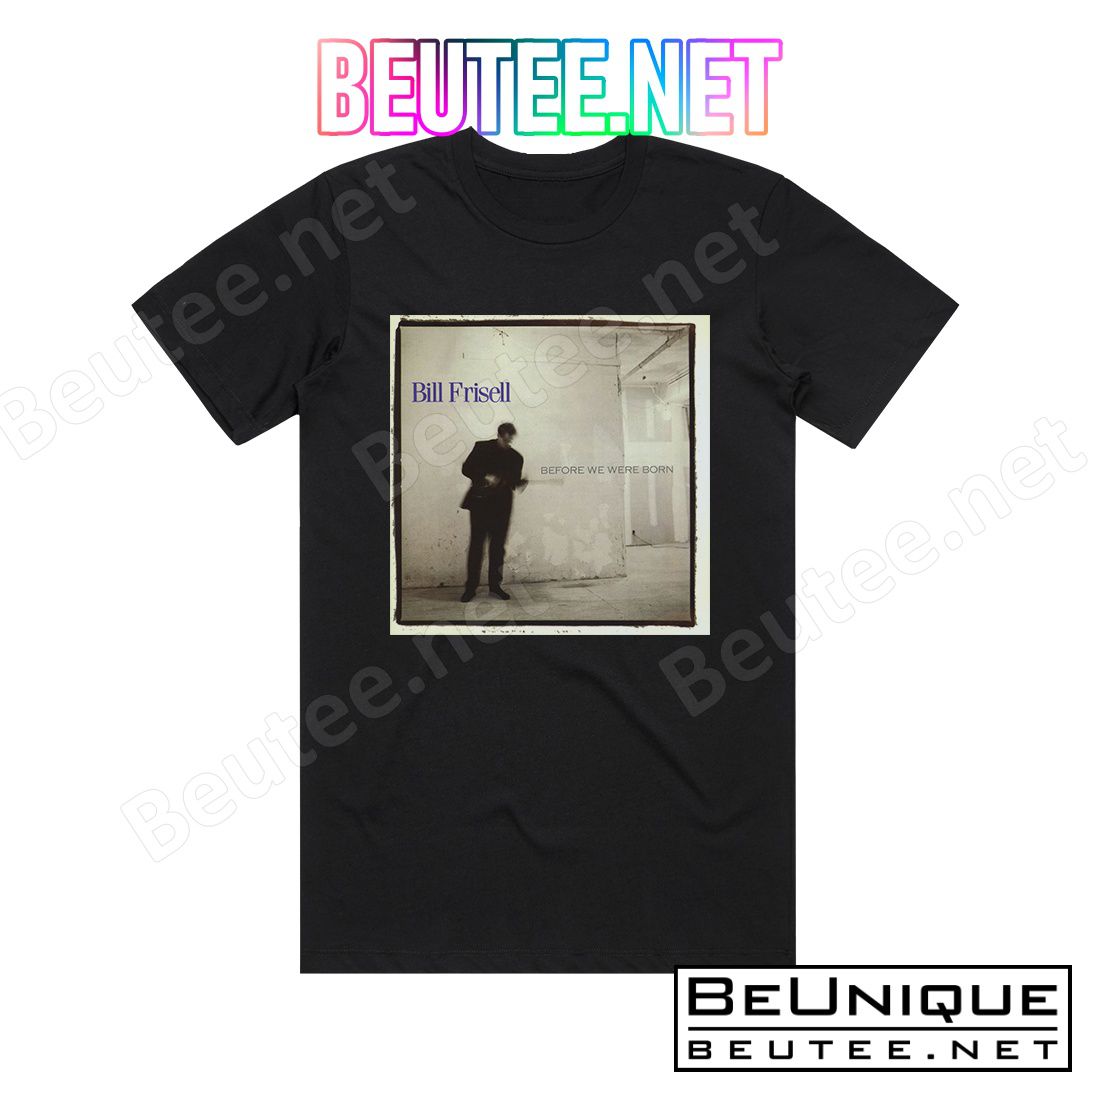 Bill Frisell Before We Were Born Album Cover T-Shirt